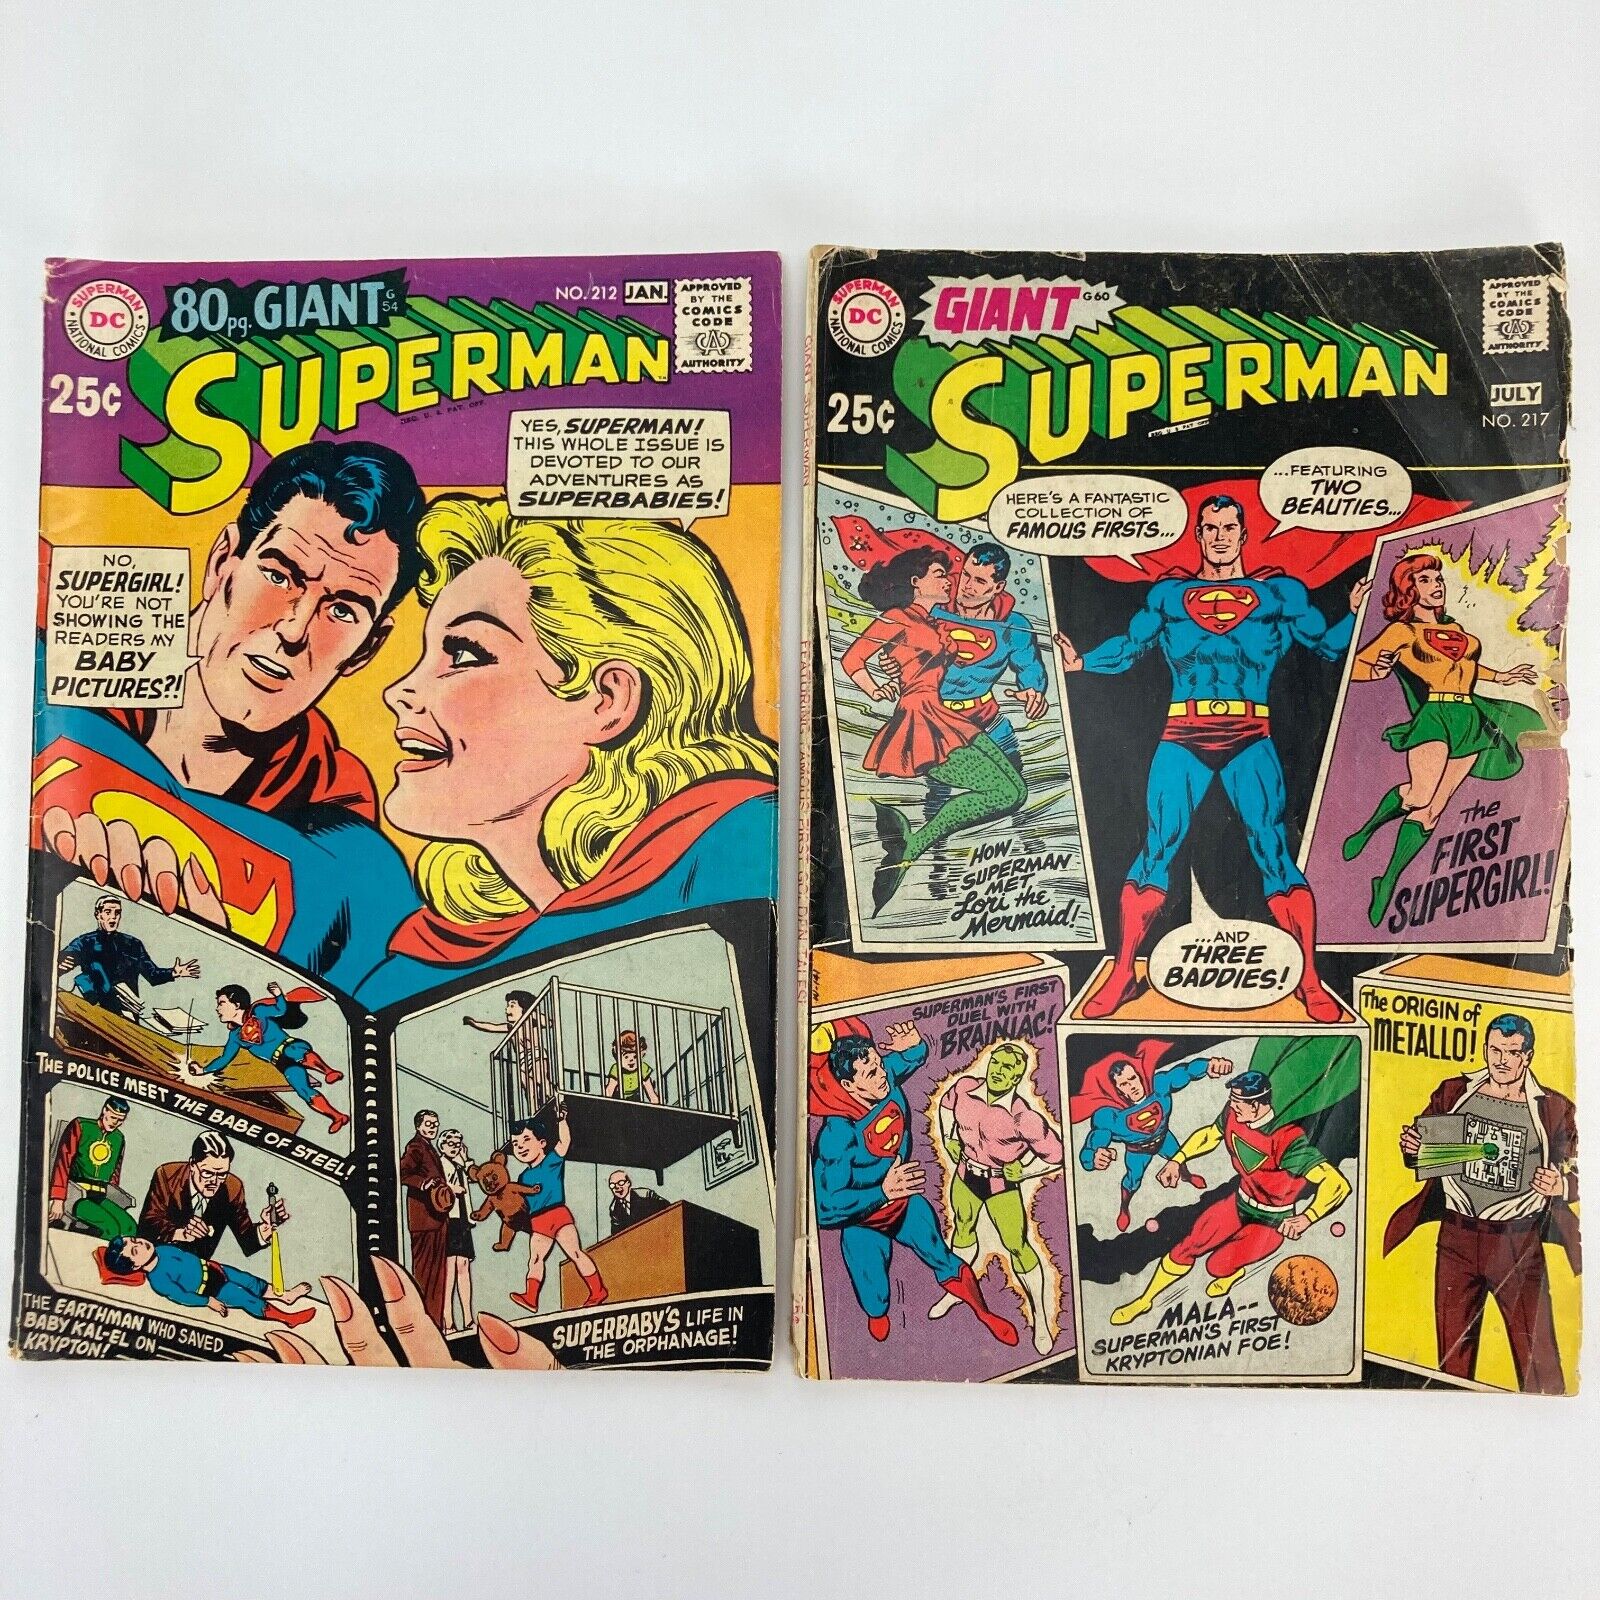 DC Comics Giant Superman #212 #217 1968 1969 Lot of 2 Large 80 Pages